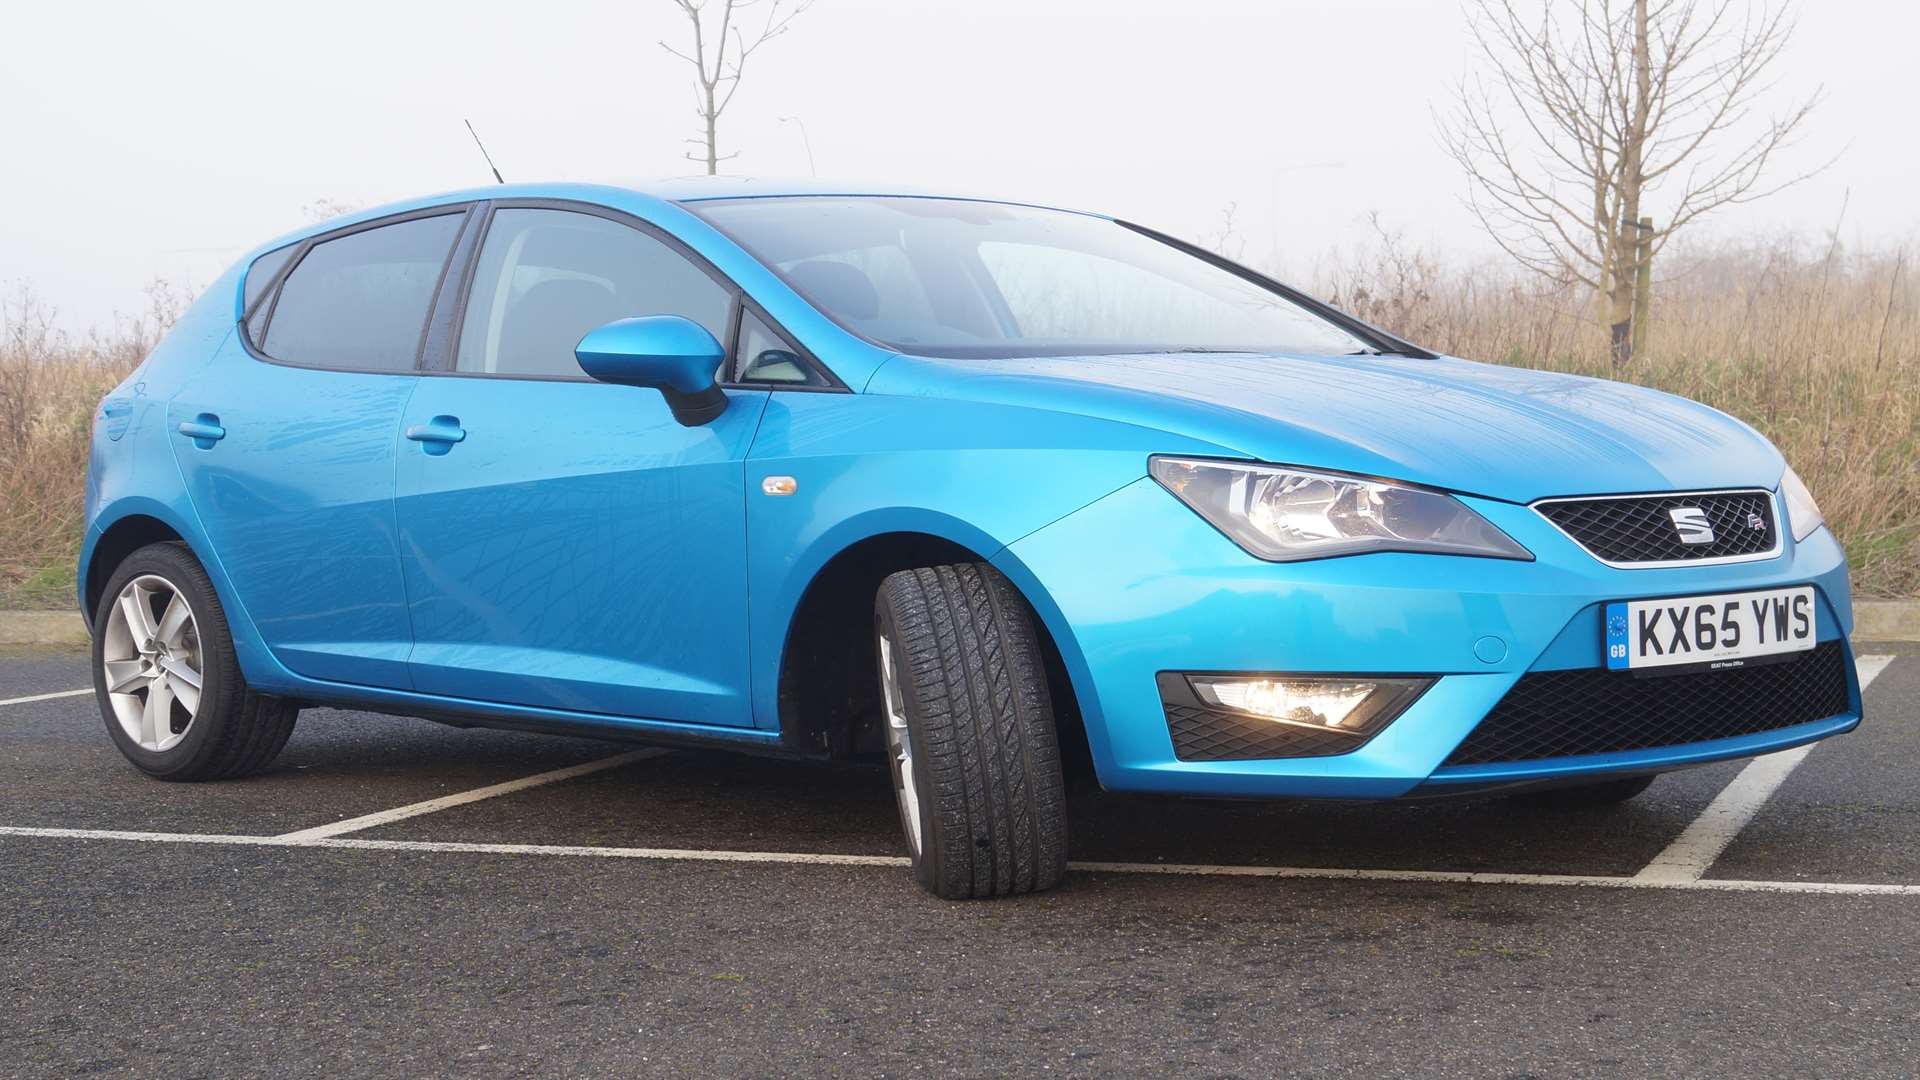 The little hatchback is certainly a bit of a looker